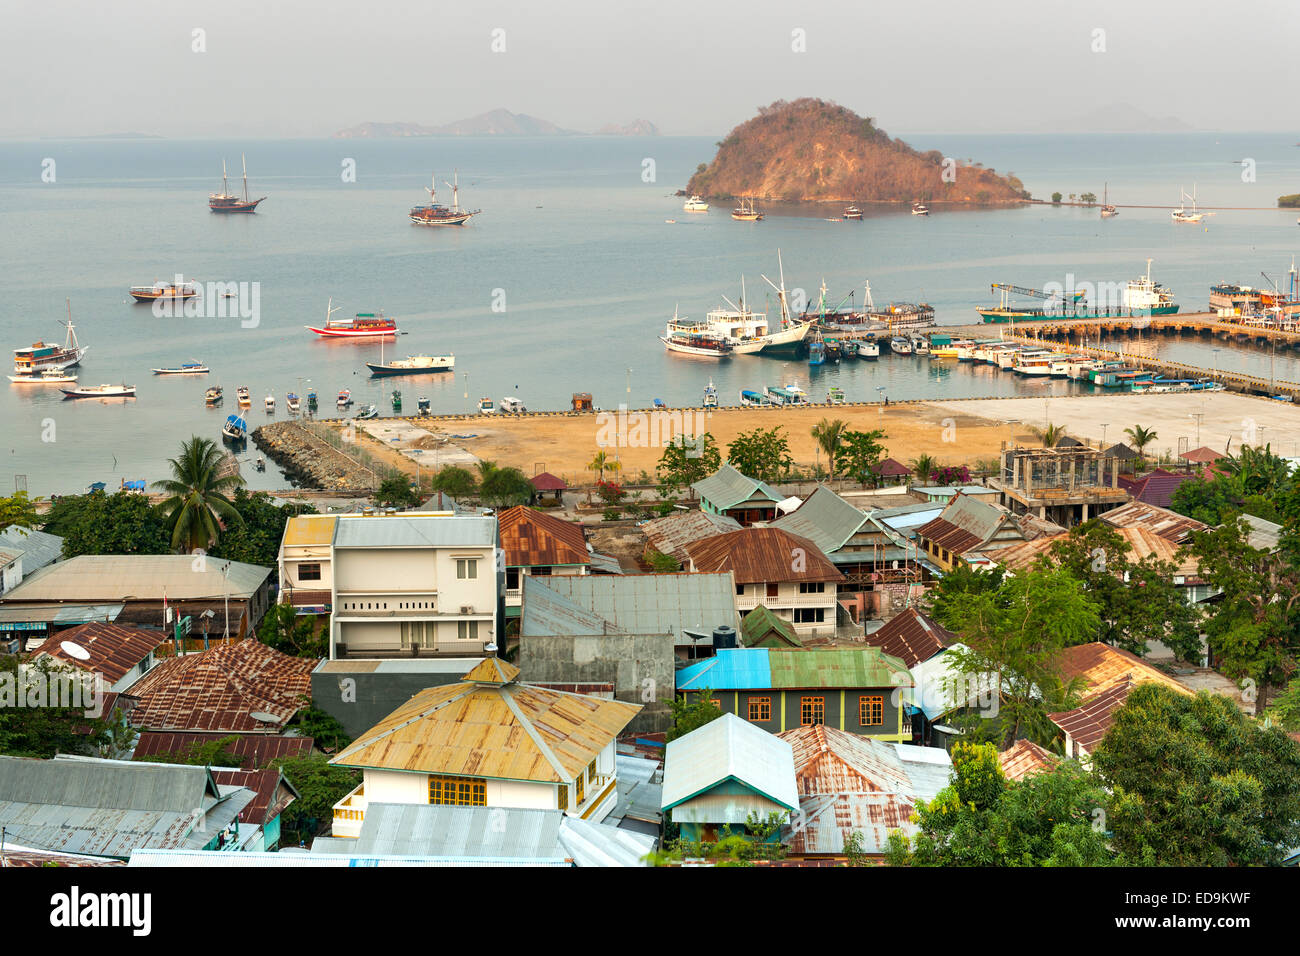 The town and port of Labuan Bajo on the island of Flores, East Nusa Tenggara, Indonesia. Stock Photo